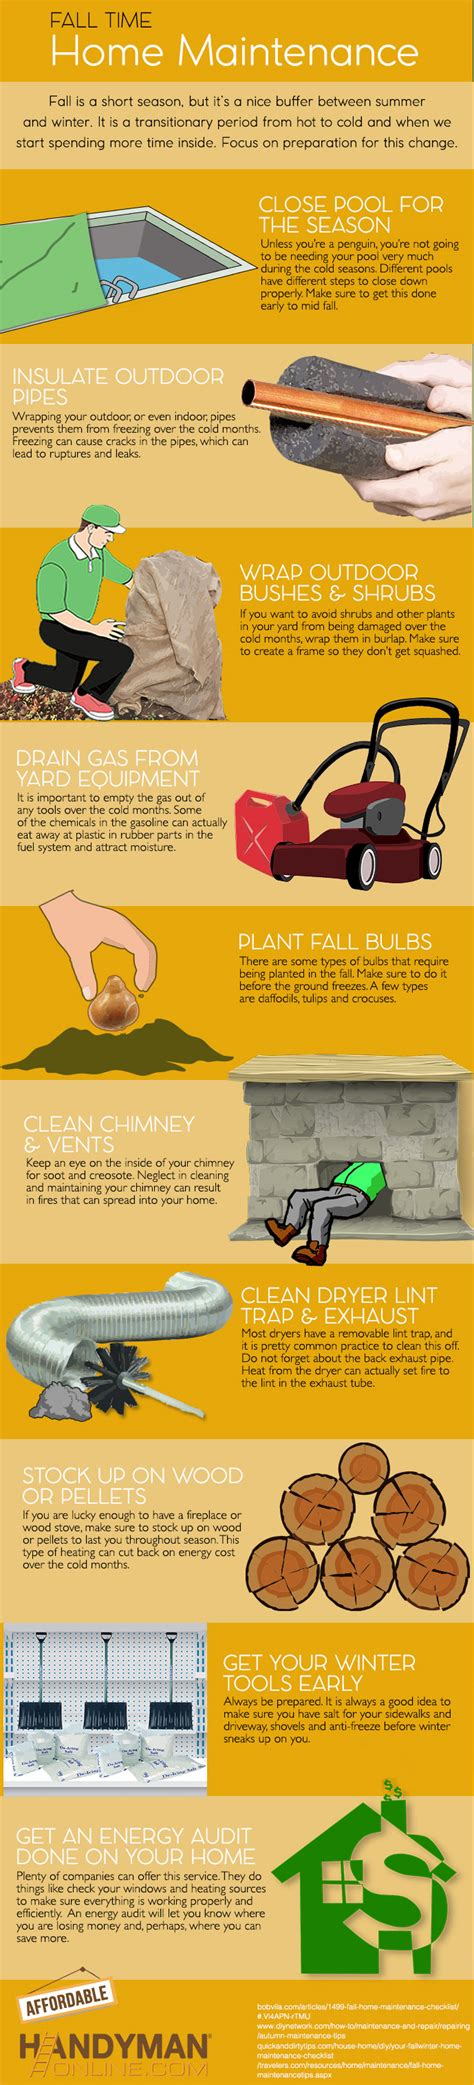 Your Trusty Annual Home Maintenance Checklist